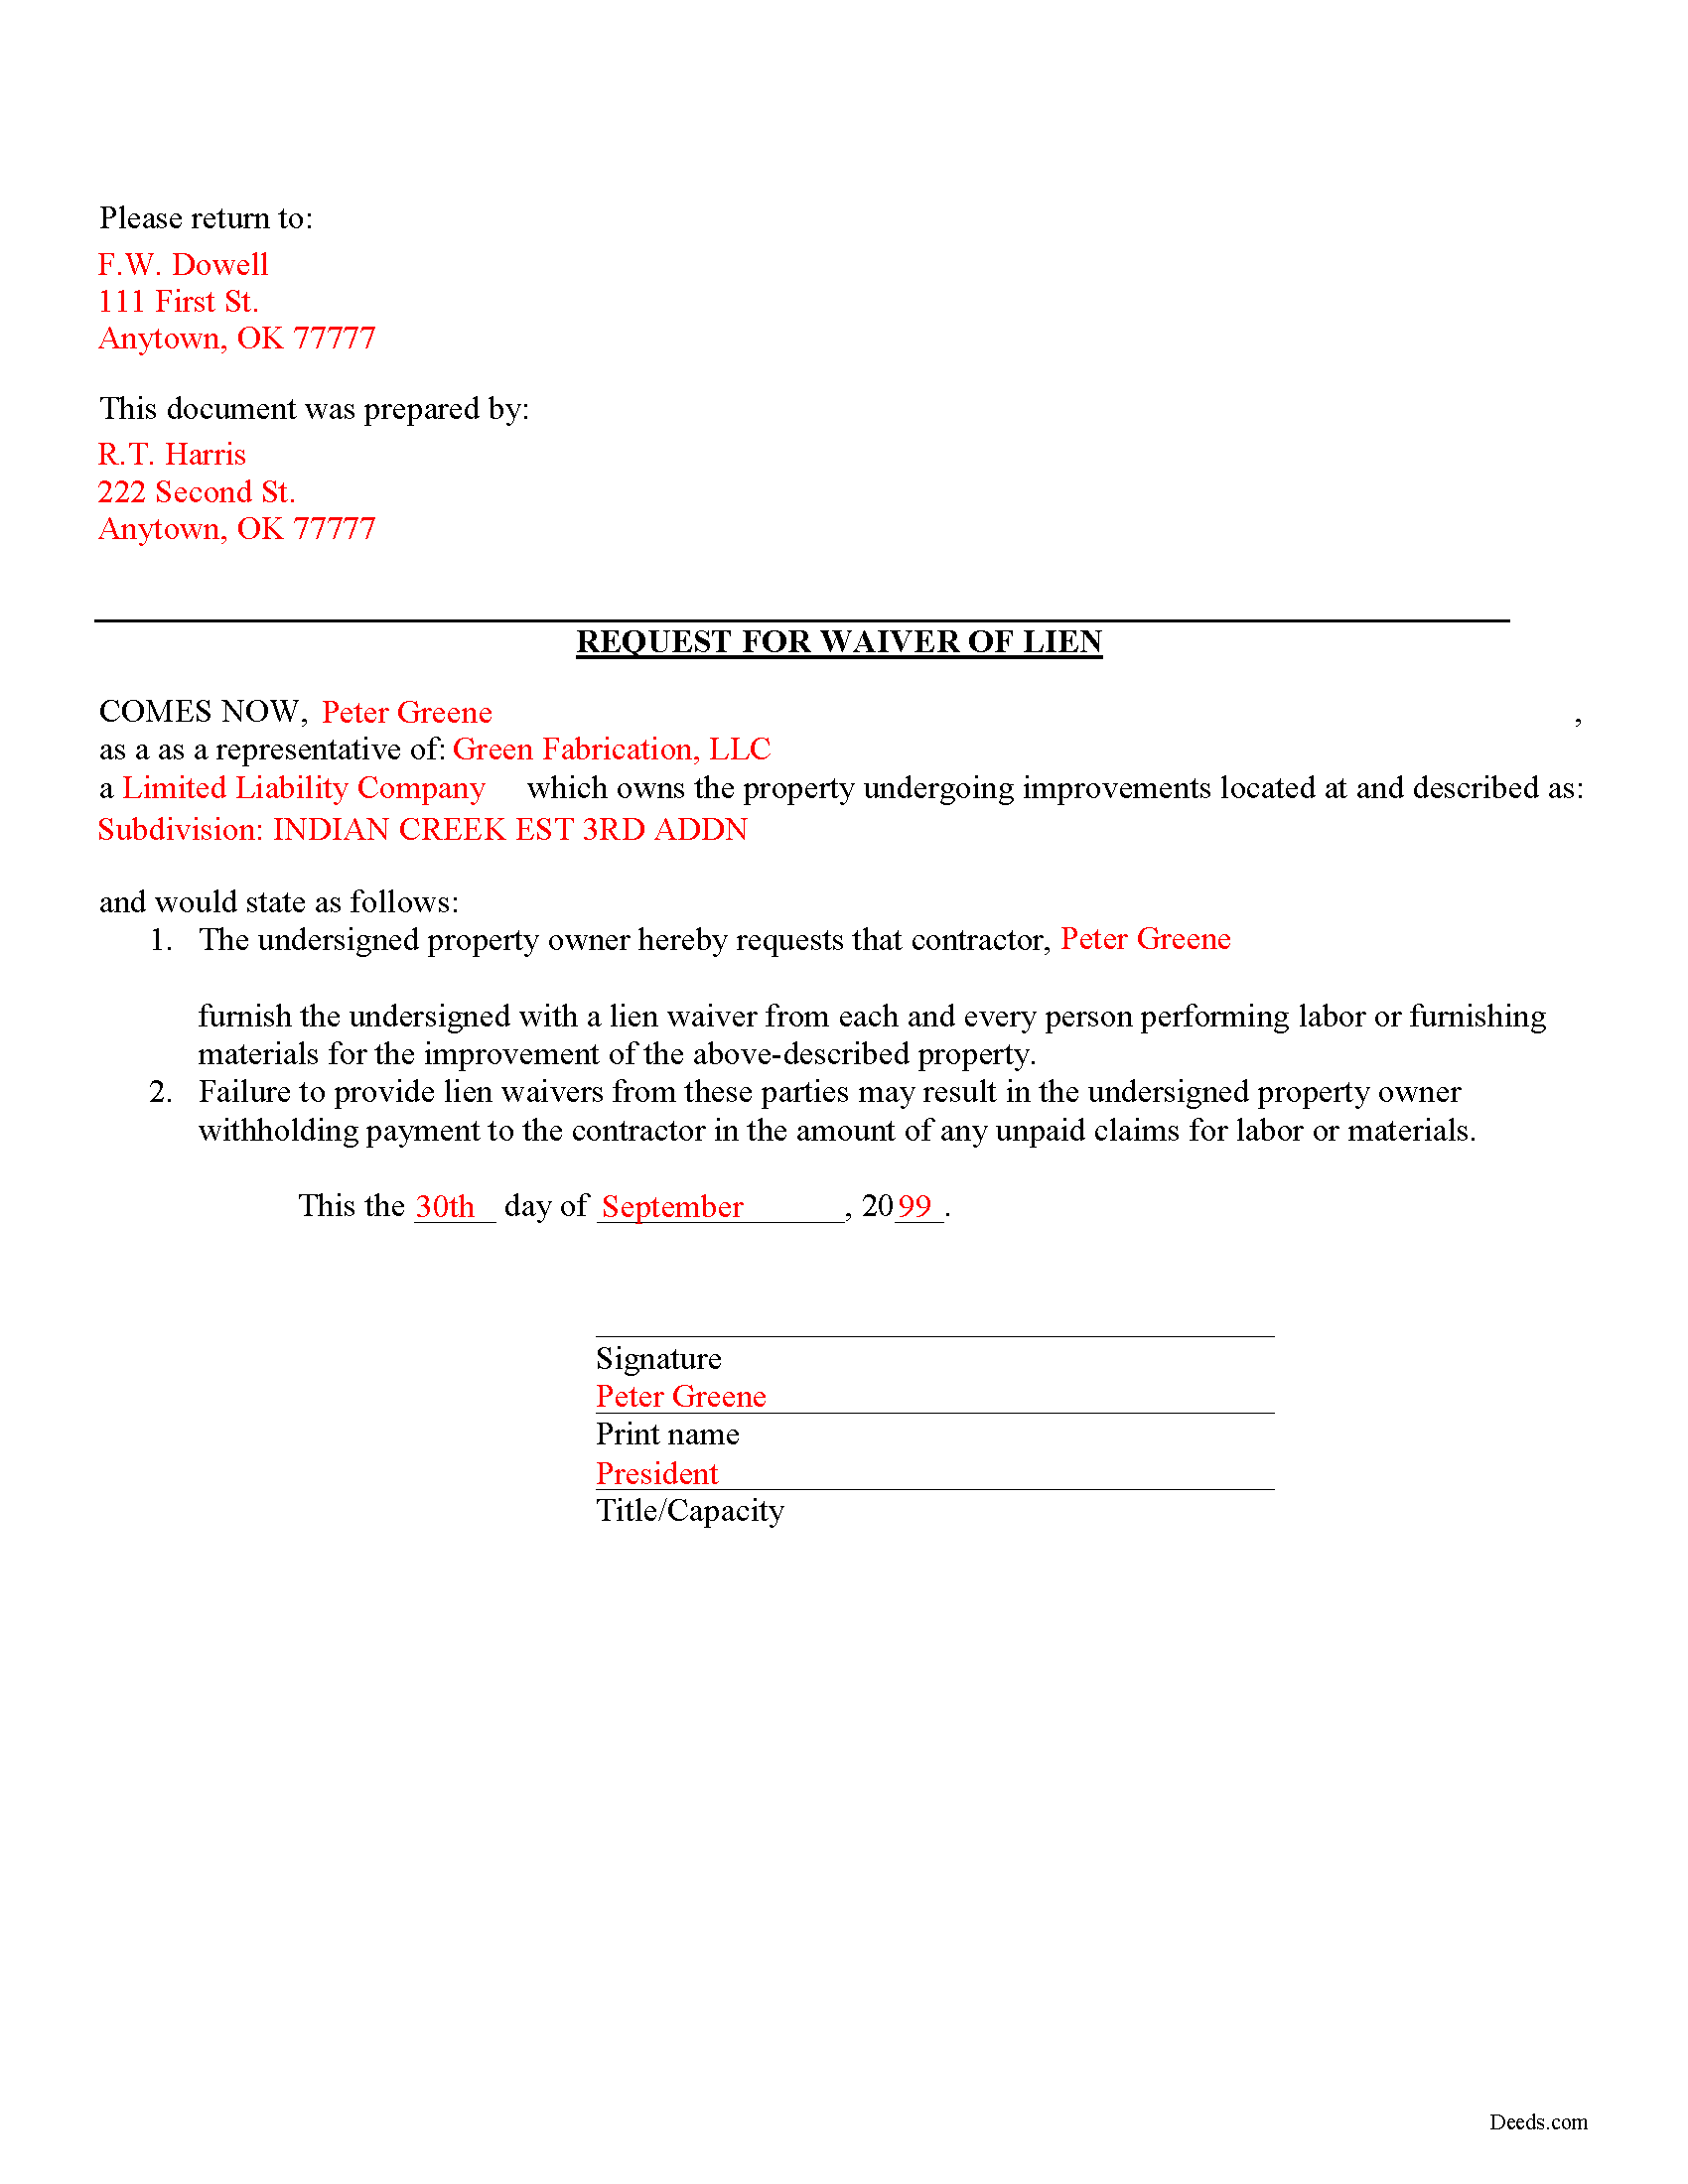 Completed Example of the Request for Waiver of Lien Document